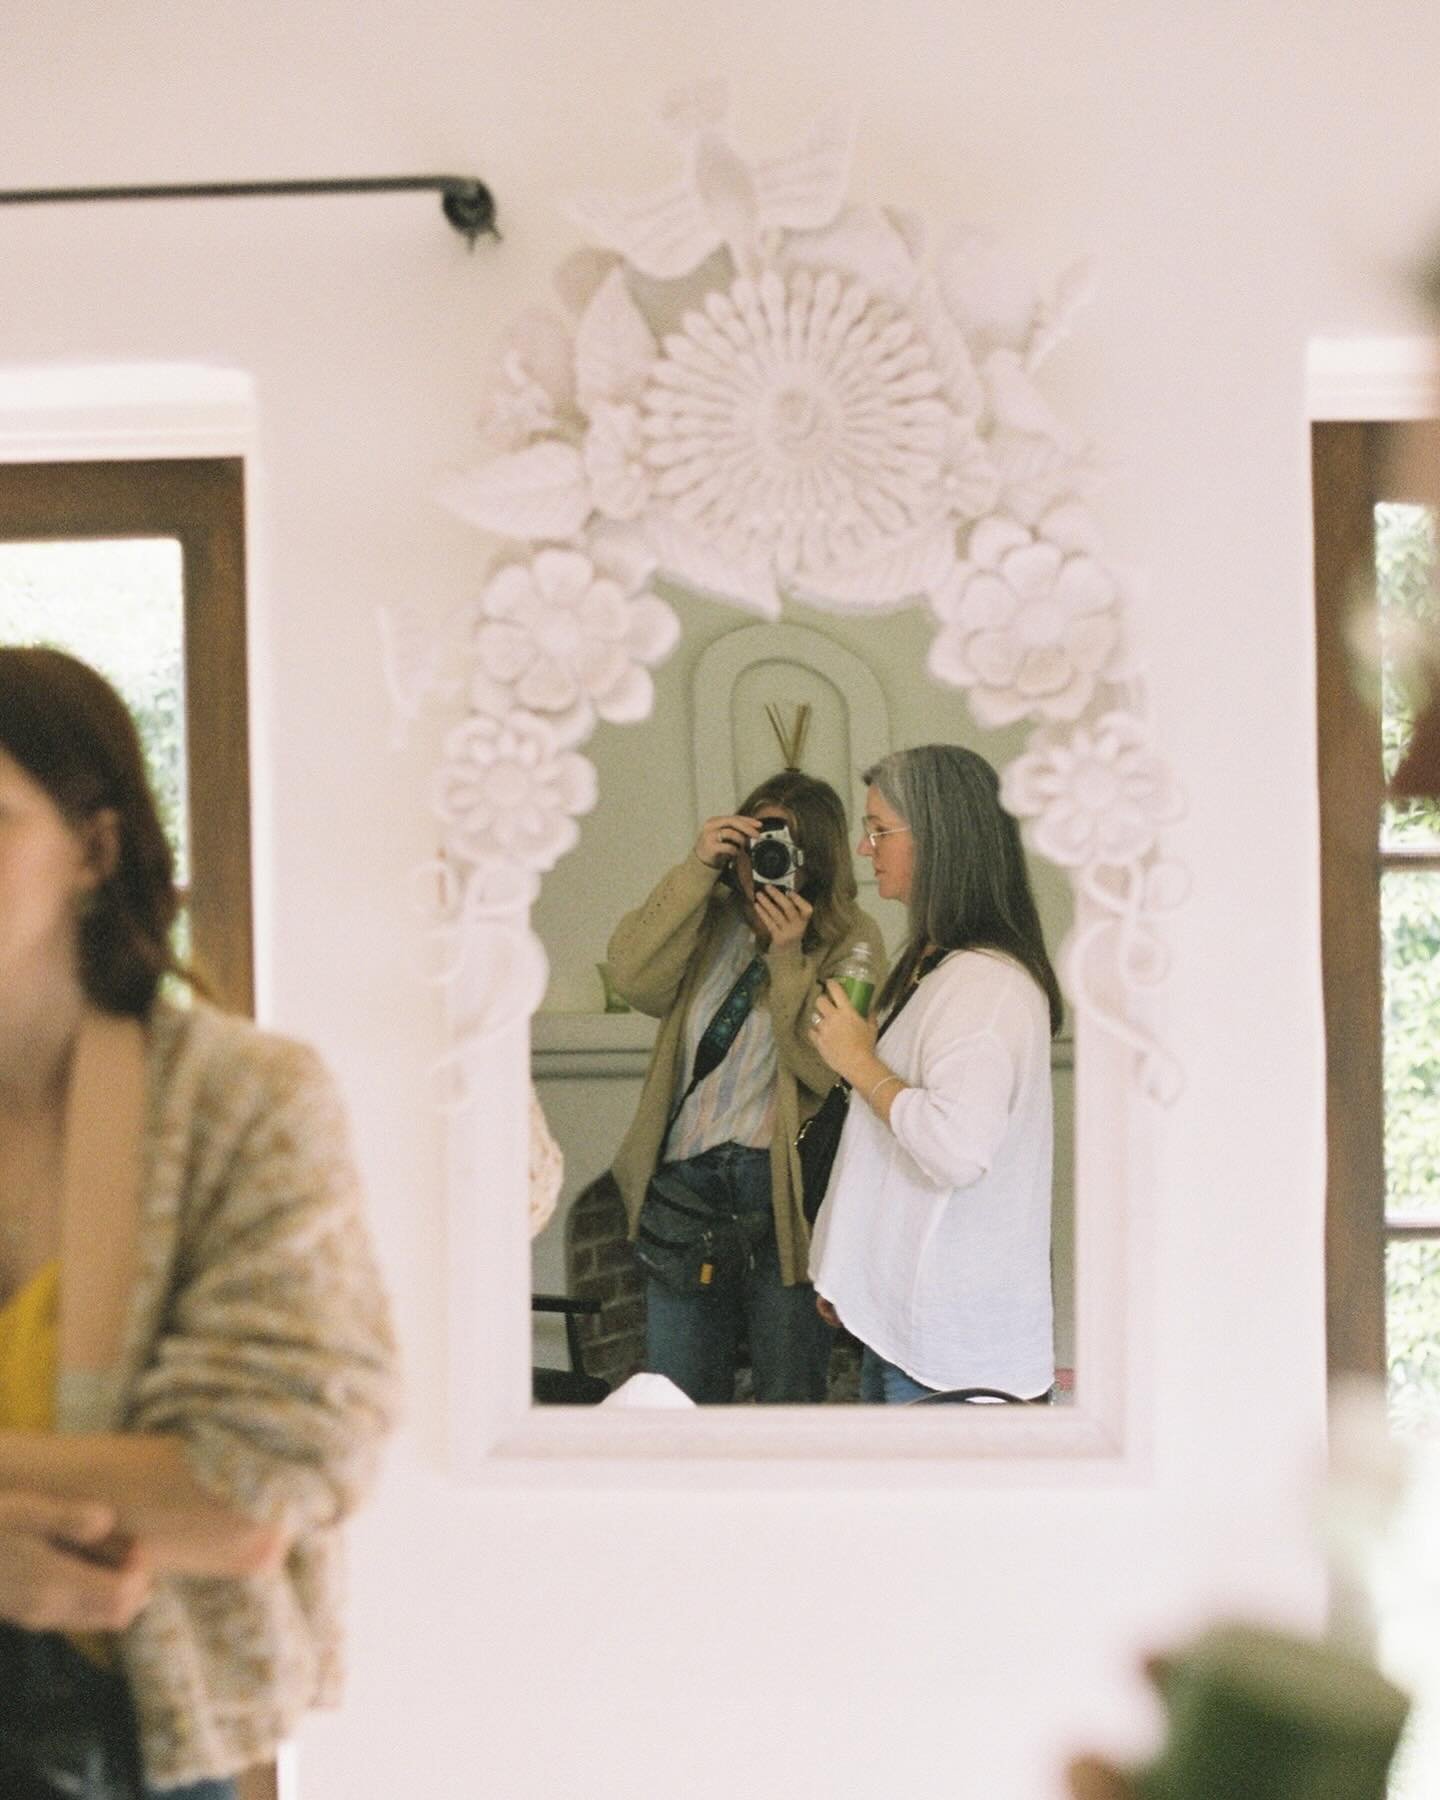 Hi 👋🏻 #mirrorselfiemonday 

Alternative title: Kamie x Two 
Alternative title title: what happens when you get a bunch of a photographers and a cute mirror? We can&rsquo;t help ourselves. 

#kodakprofessional #kodakportra400 #thefindlab #colormehap